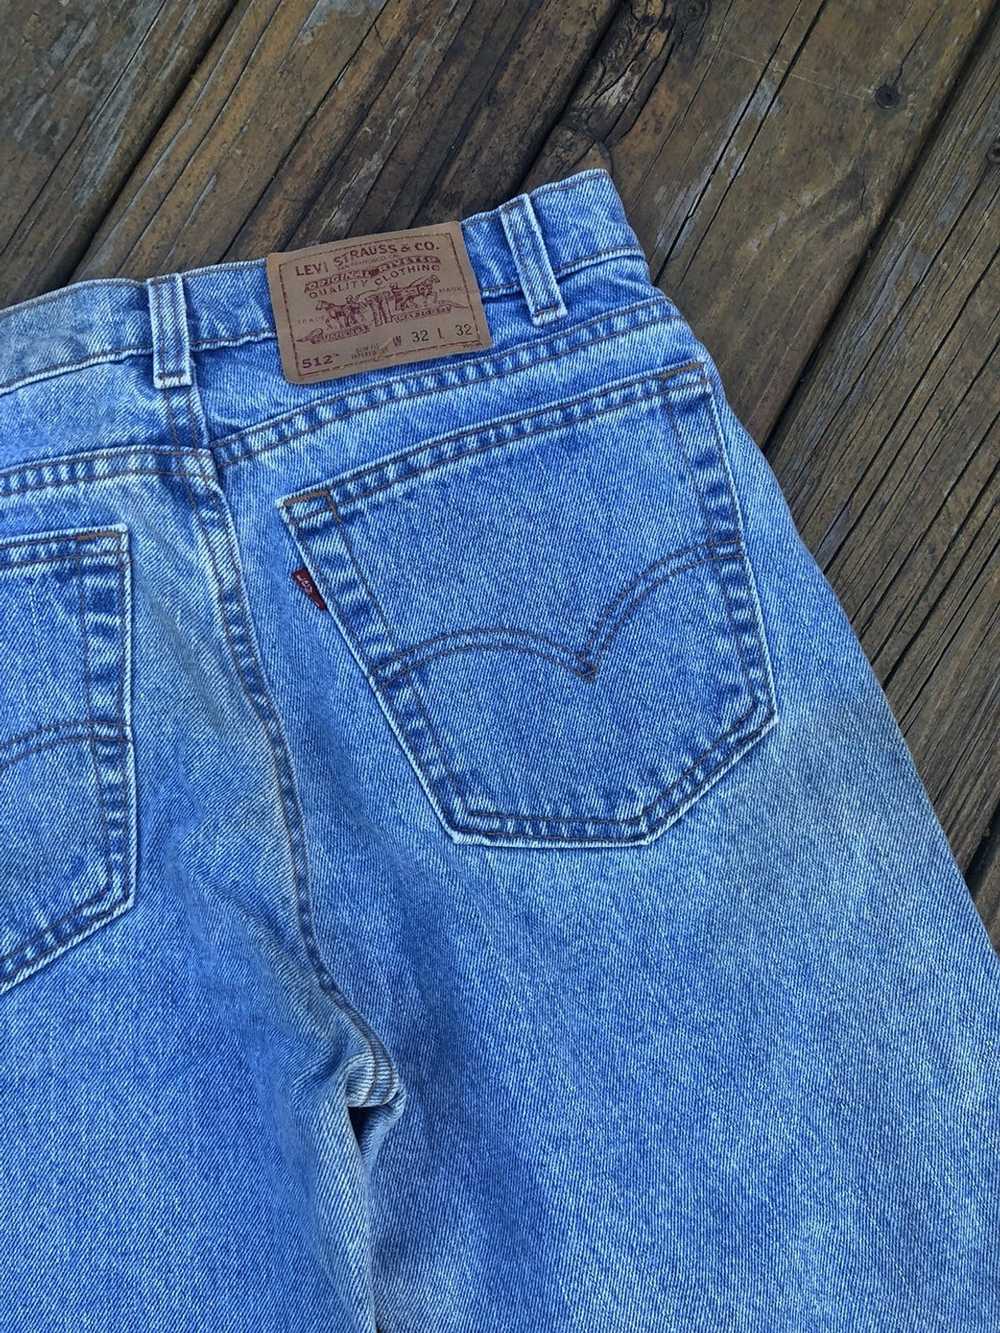 LVC × Levi's × Vintage 90's LEVIS MADE IN USA 512… - image 8